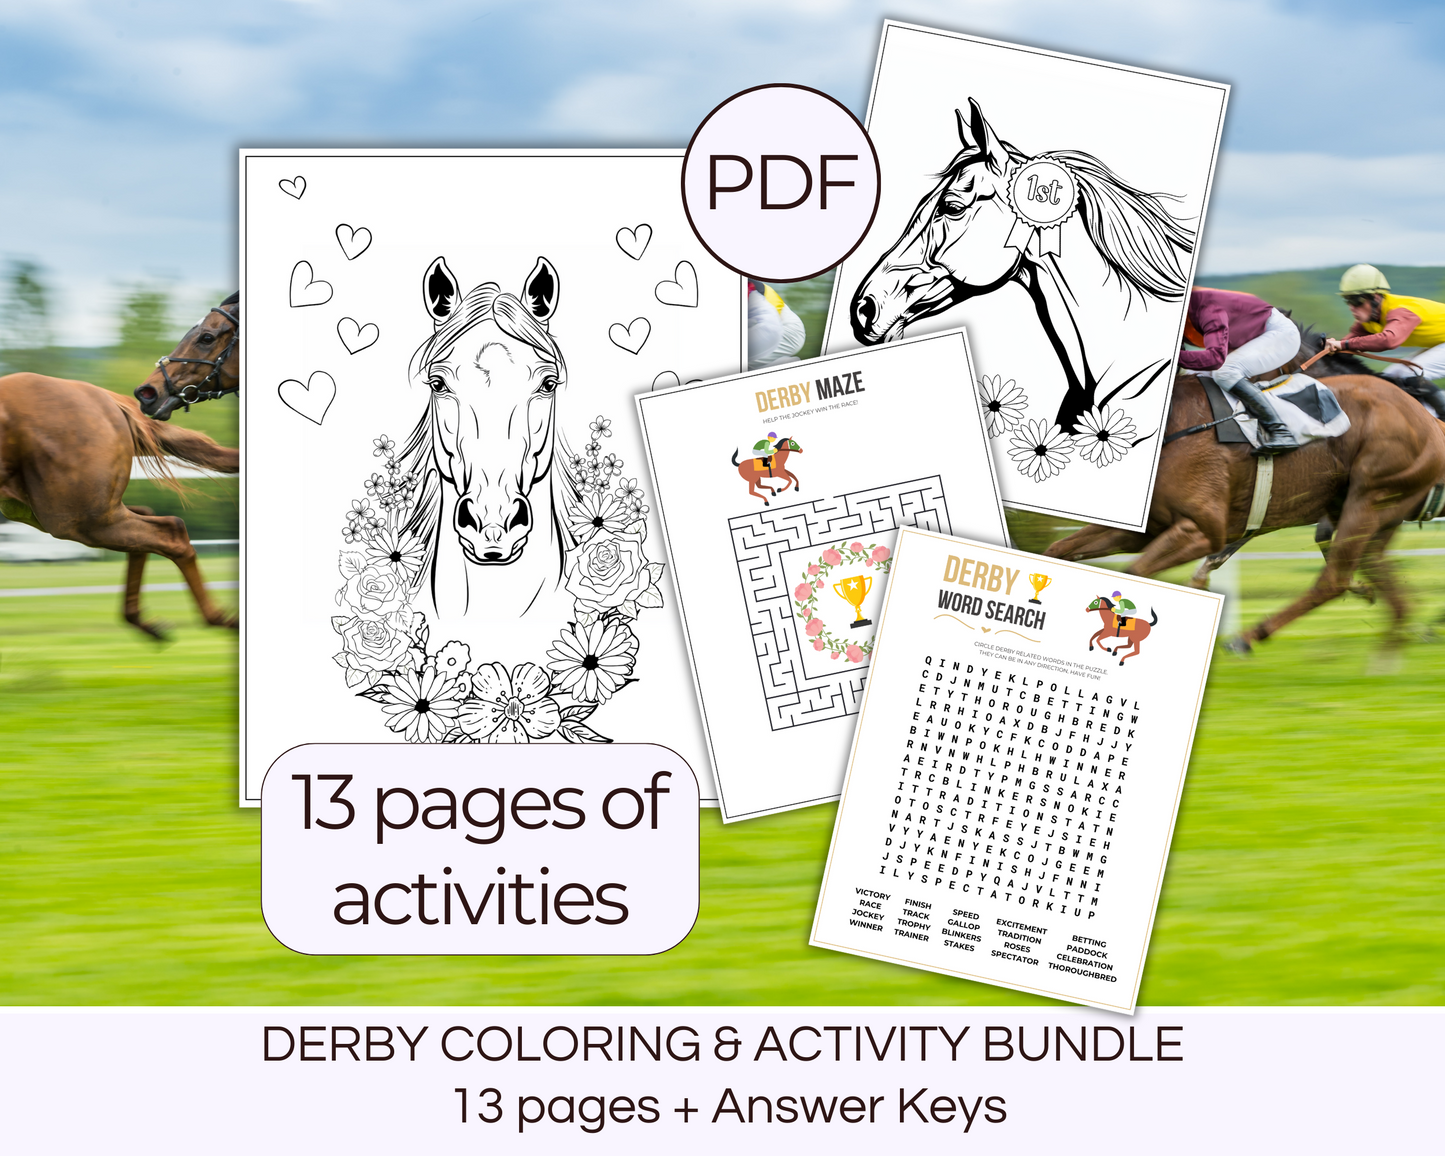 Derby Horse Race Coloring and Activity Booklet, showing 4 pages of horse maze, horse word search and horse coloring pictures. Includes 13 pages of activities.